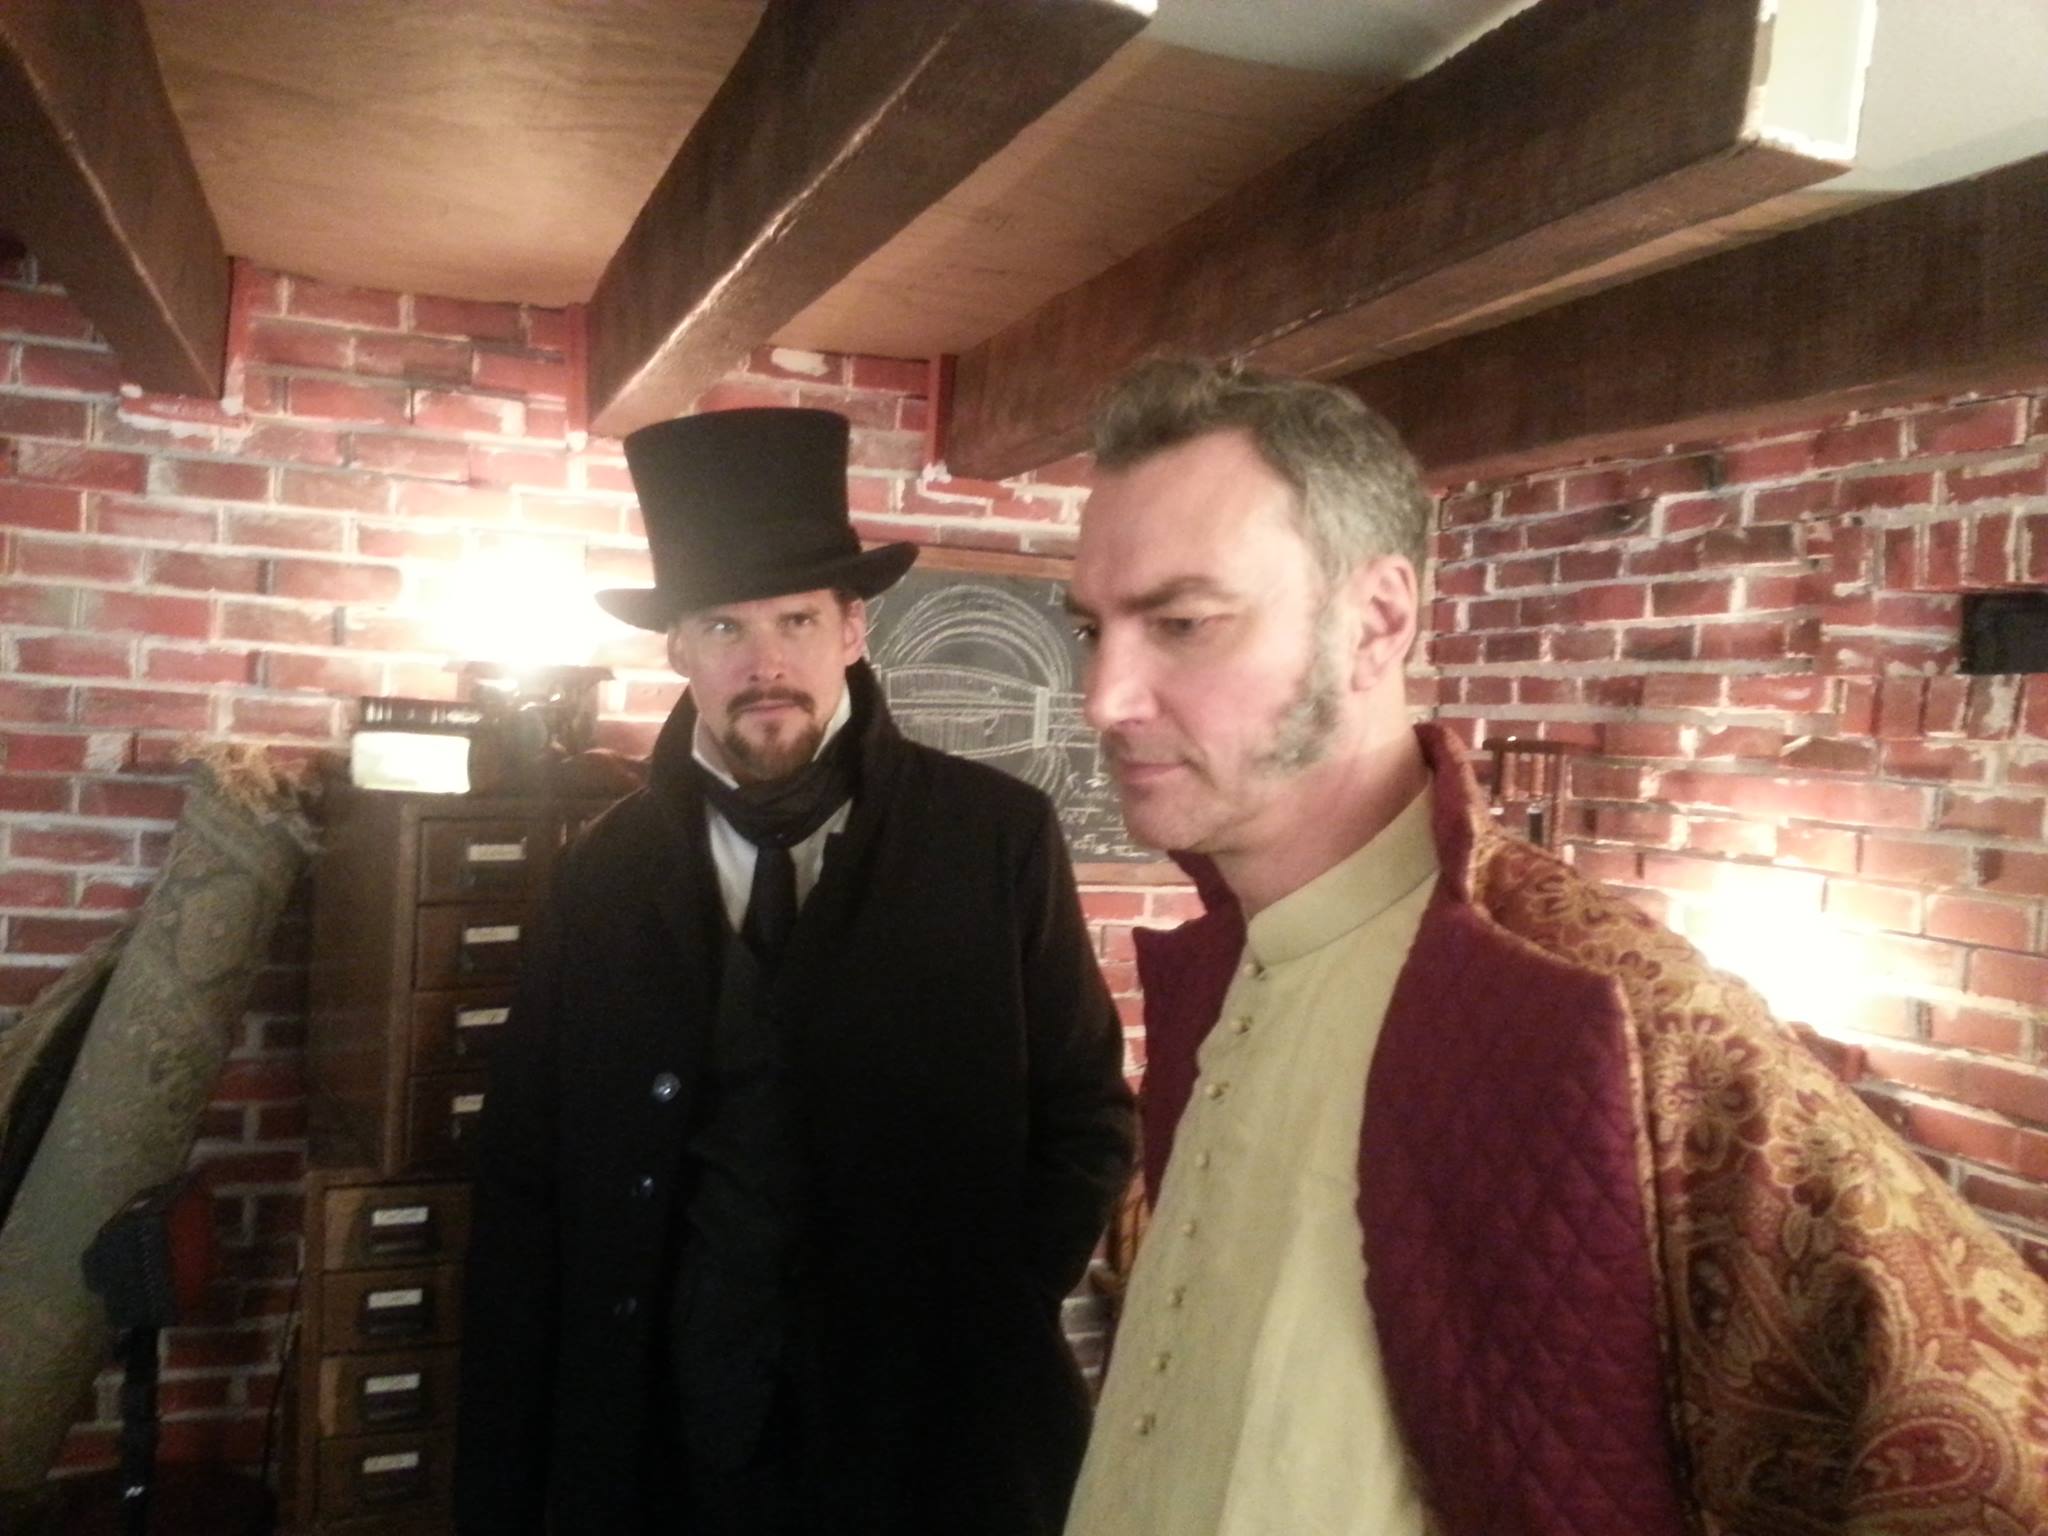 Onset photo Scott King (PUPPET MASTER X) and Clive Ashborn (PIRATES OF THE CARIBBEAN: AT WORLD'S END/DEAD MAN'S CHEST, V FOR VENDETTA)